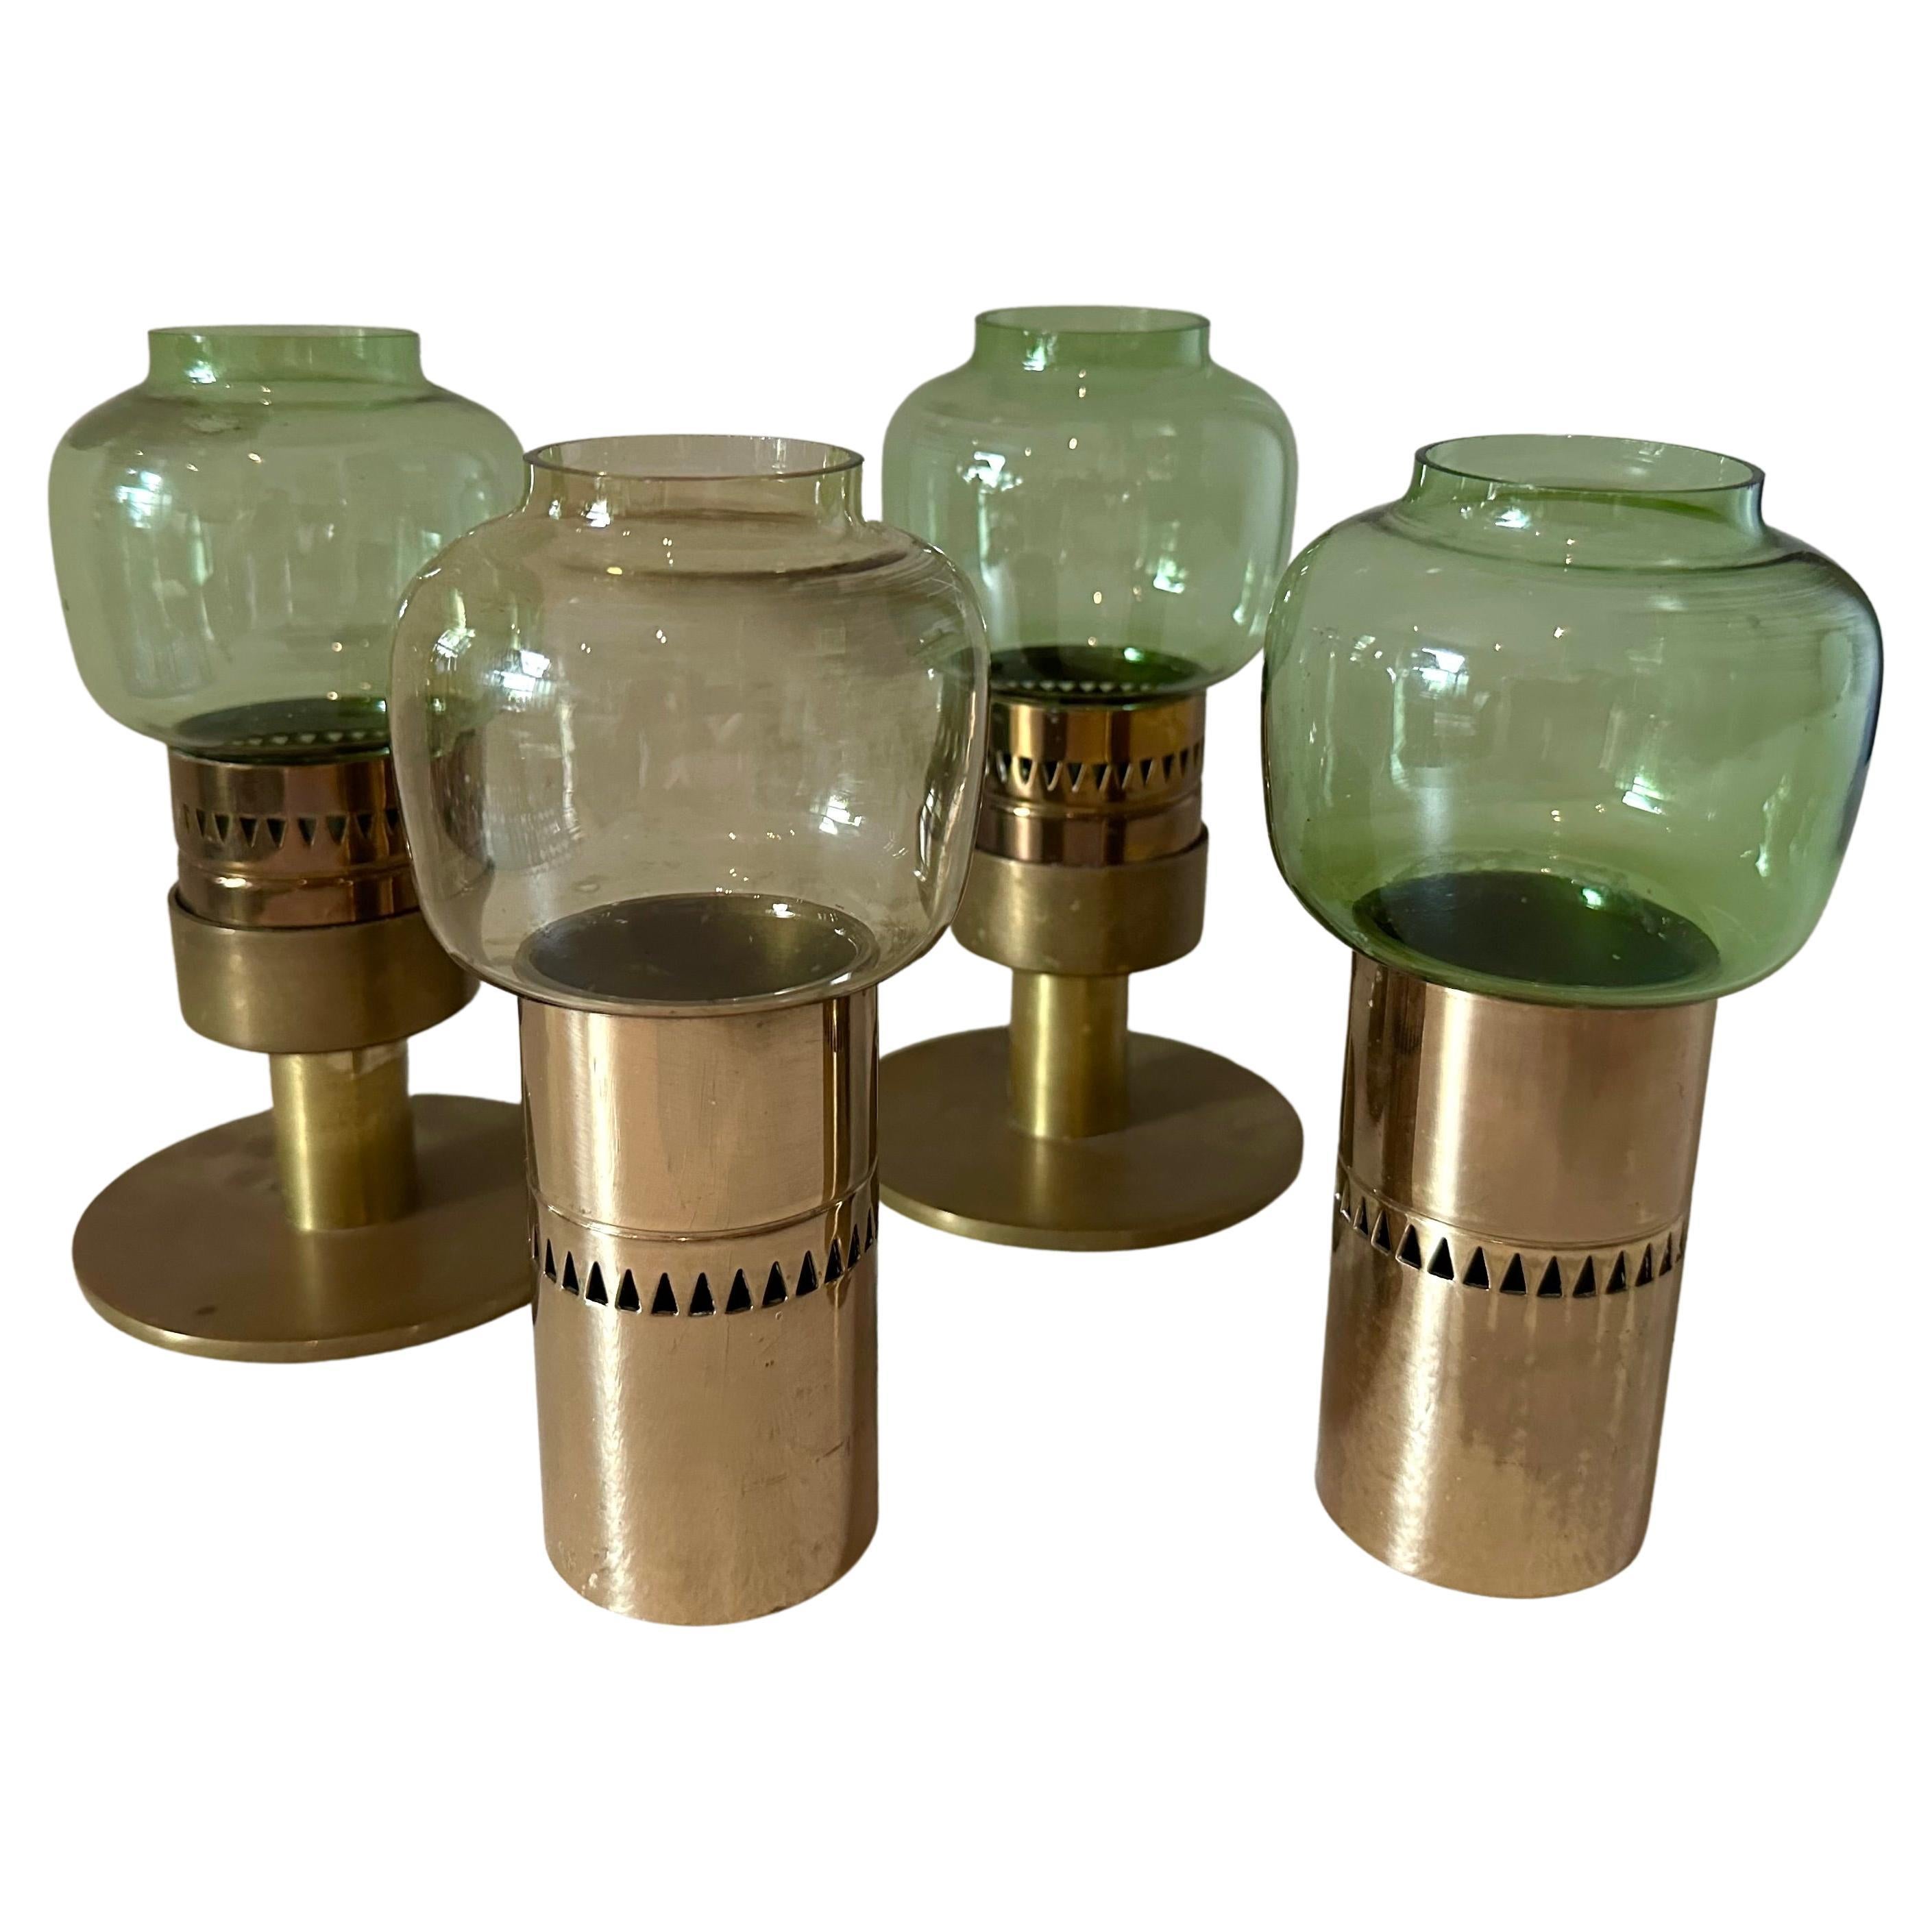 Group (4) Hans-Agne Jakobsson Brass and Glass Candlestick Votives For Sale